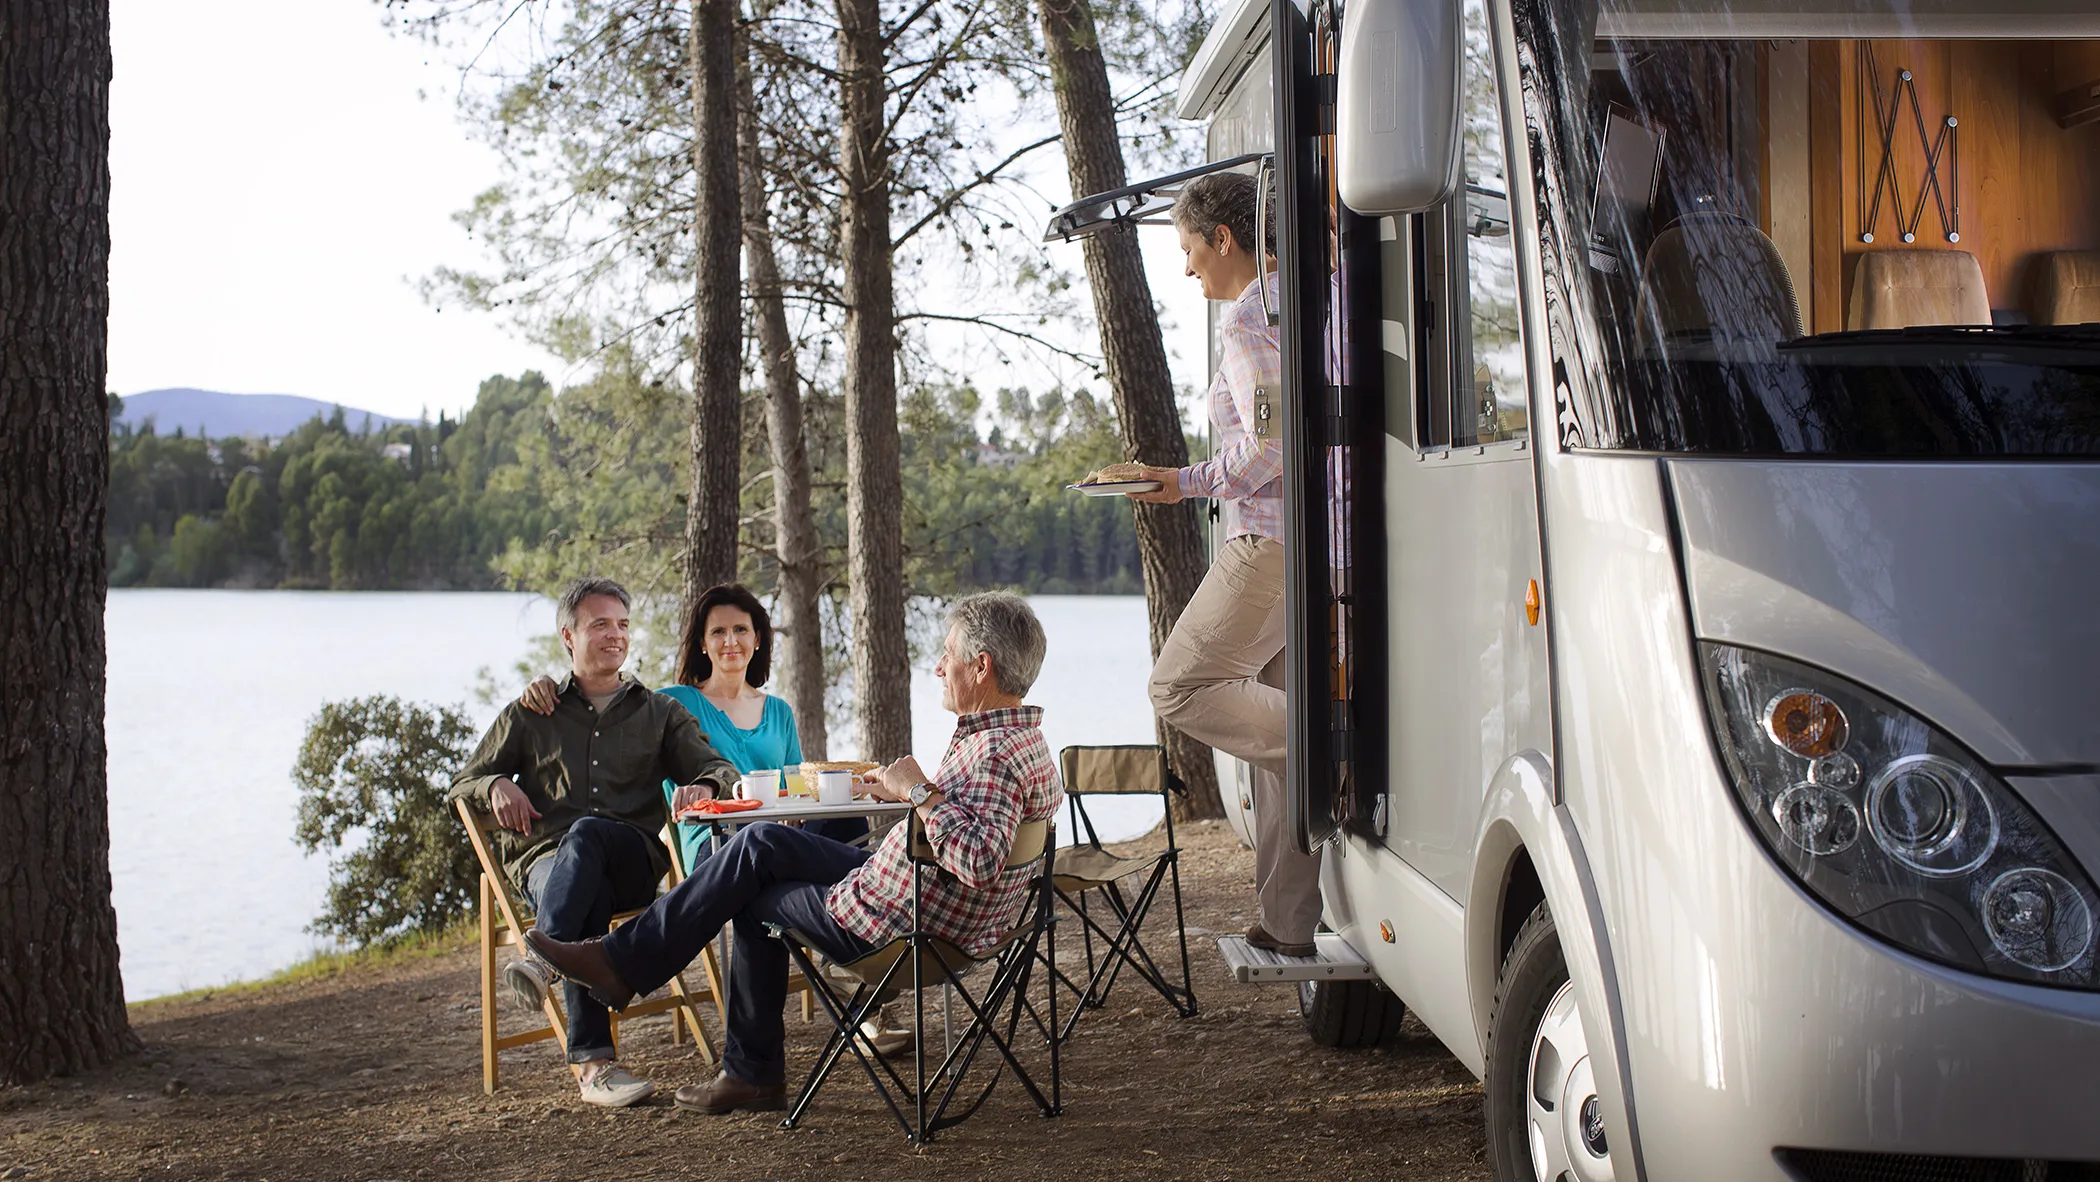 Reversing your Motorhome right into the Summer Holidays